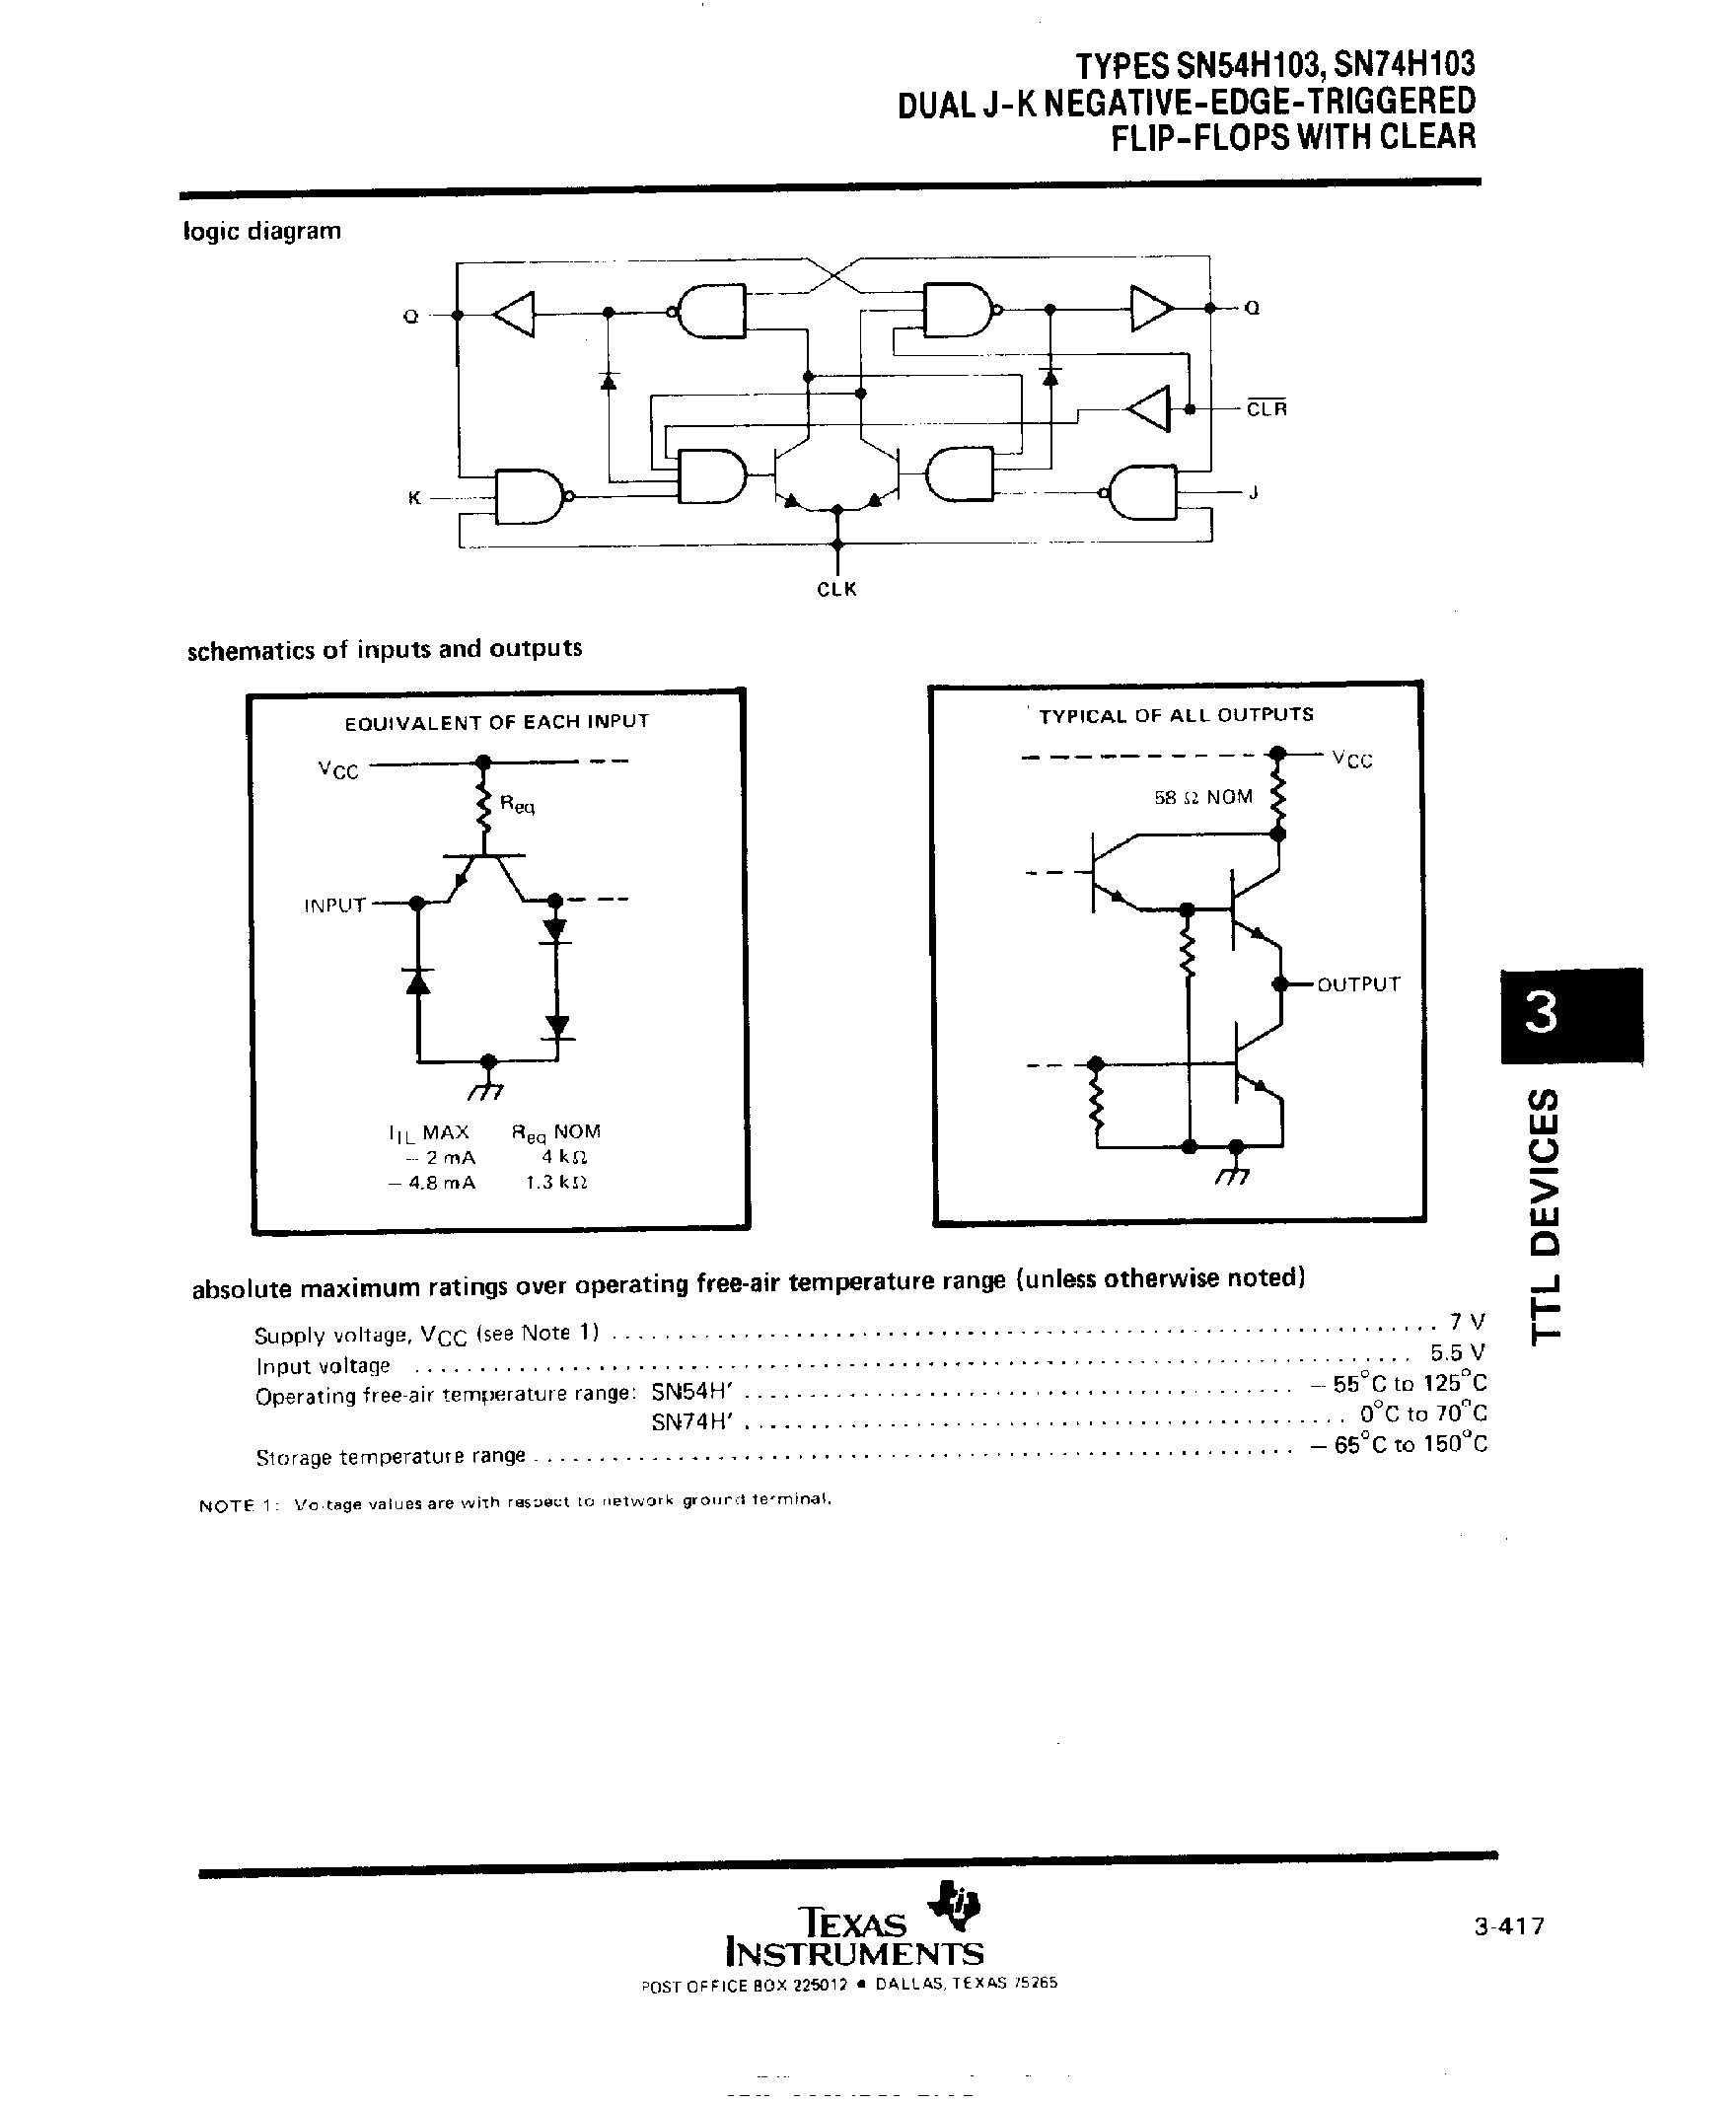 Datasheet SN74H103 - Dual J-K Negative EDGE Triggered F-F with Clear page 2